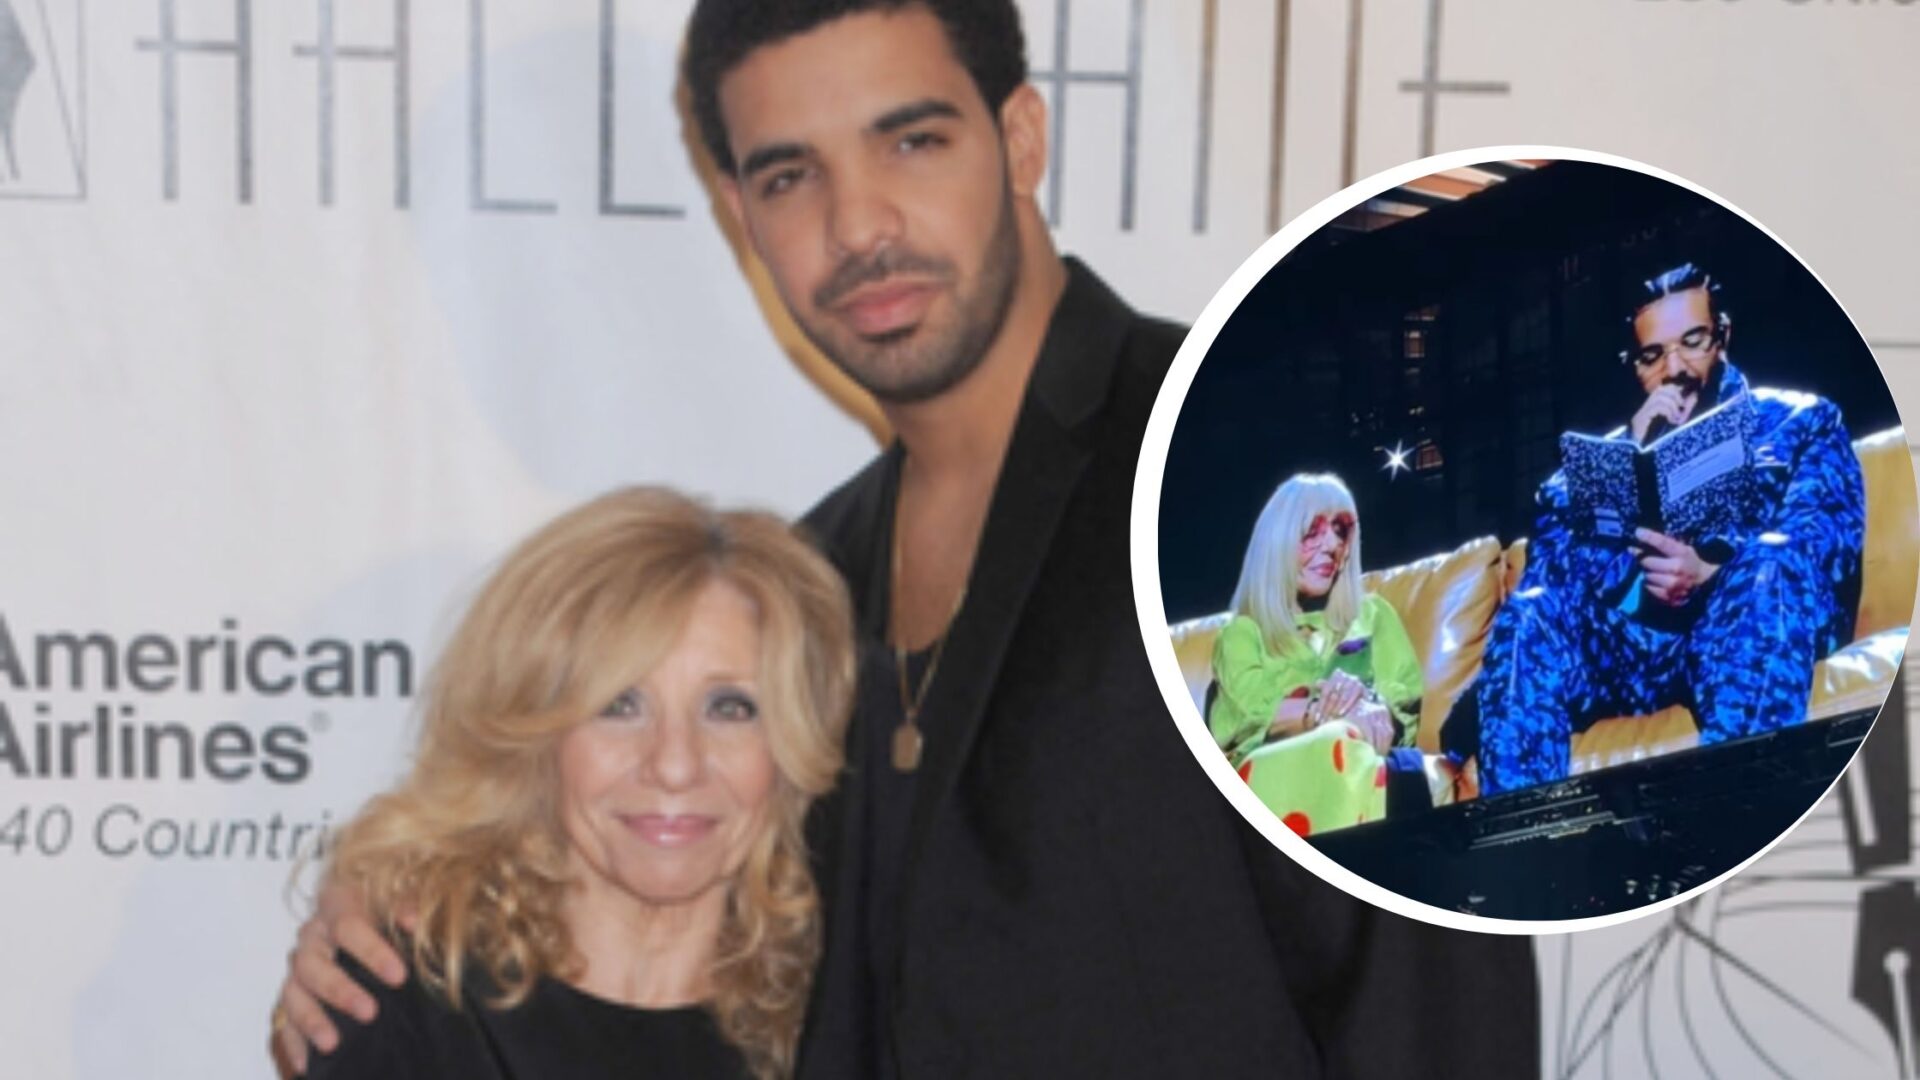 Drake Tributes His Mom with “Look What You’ve Done” Performance at Madison Square Garden